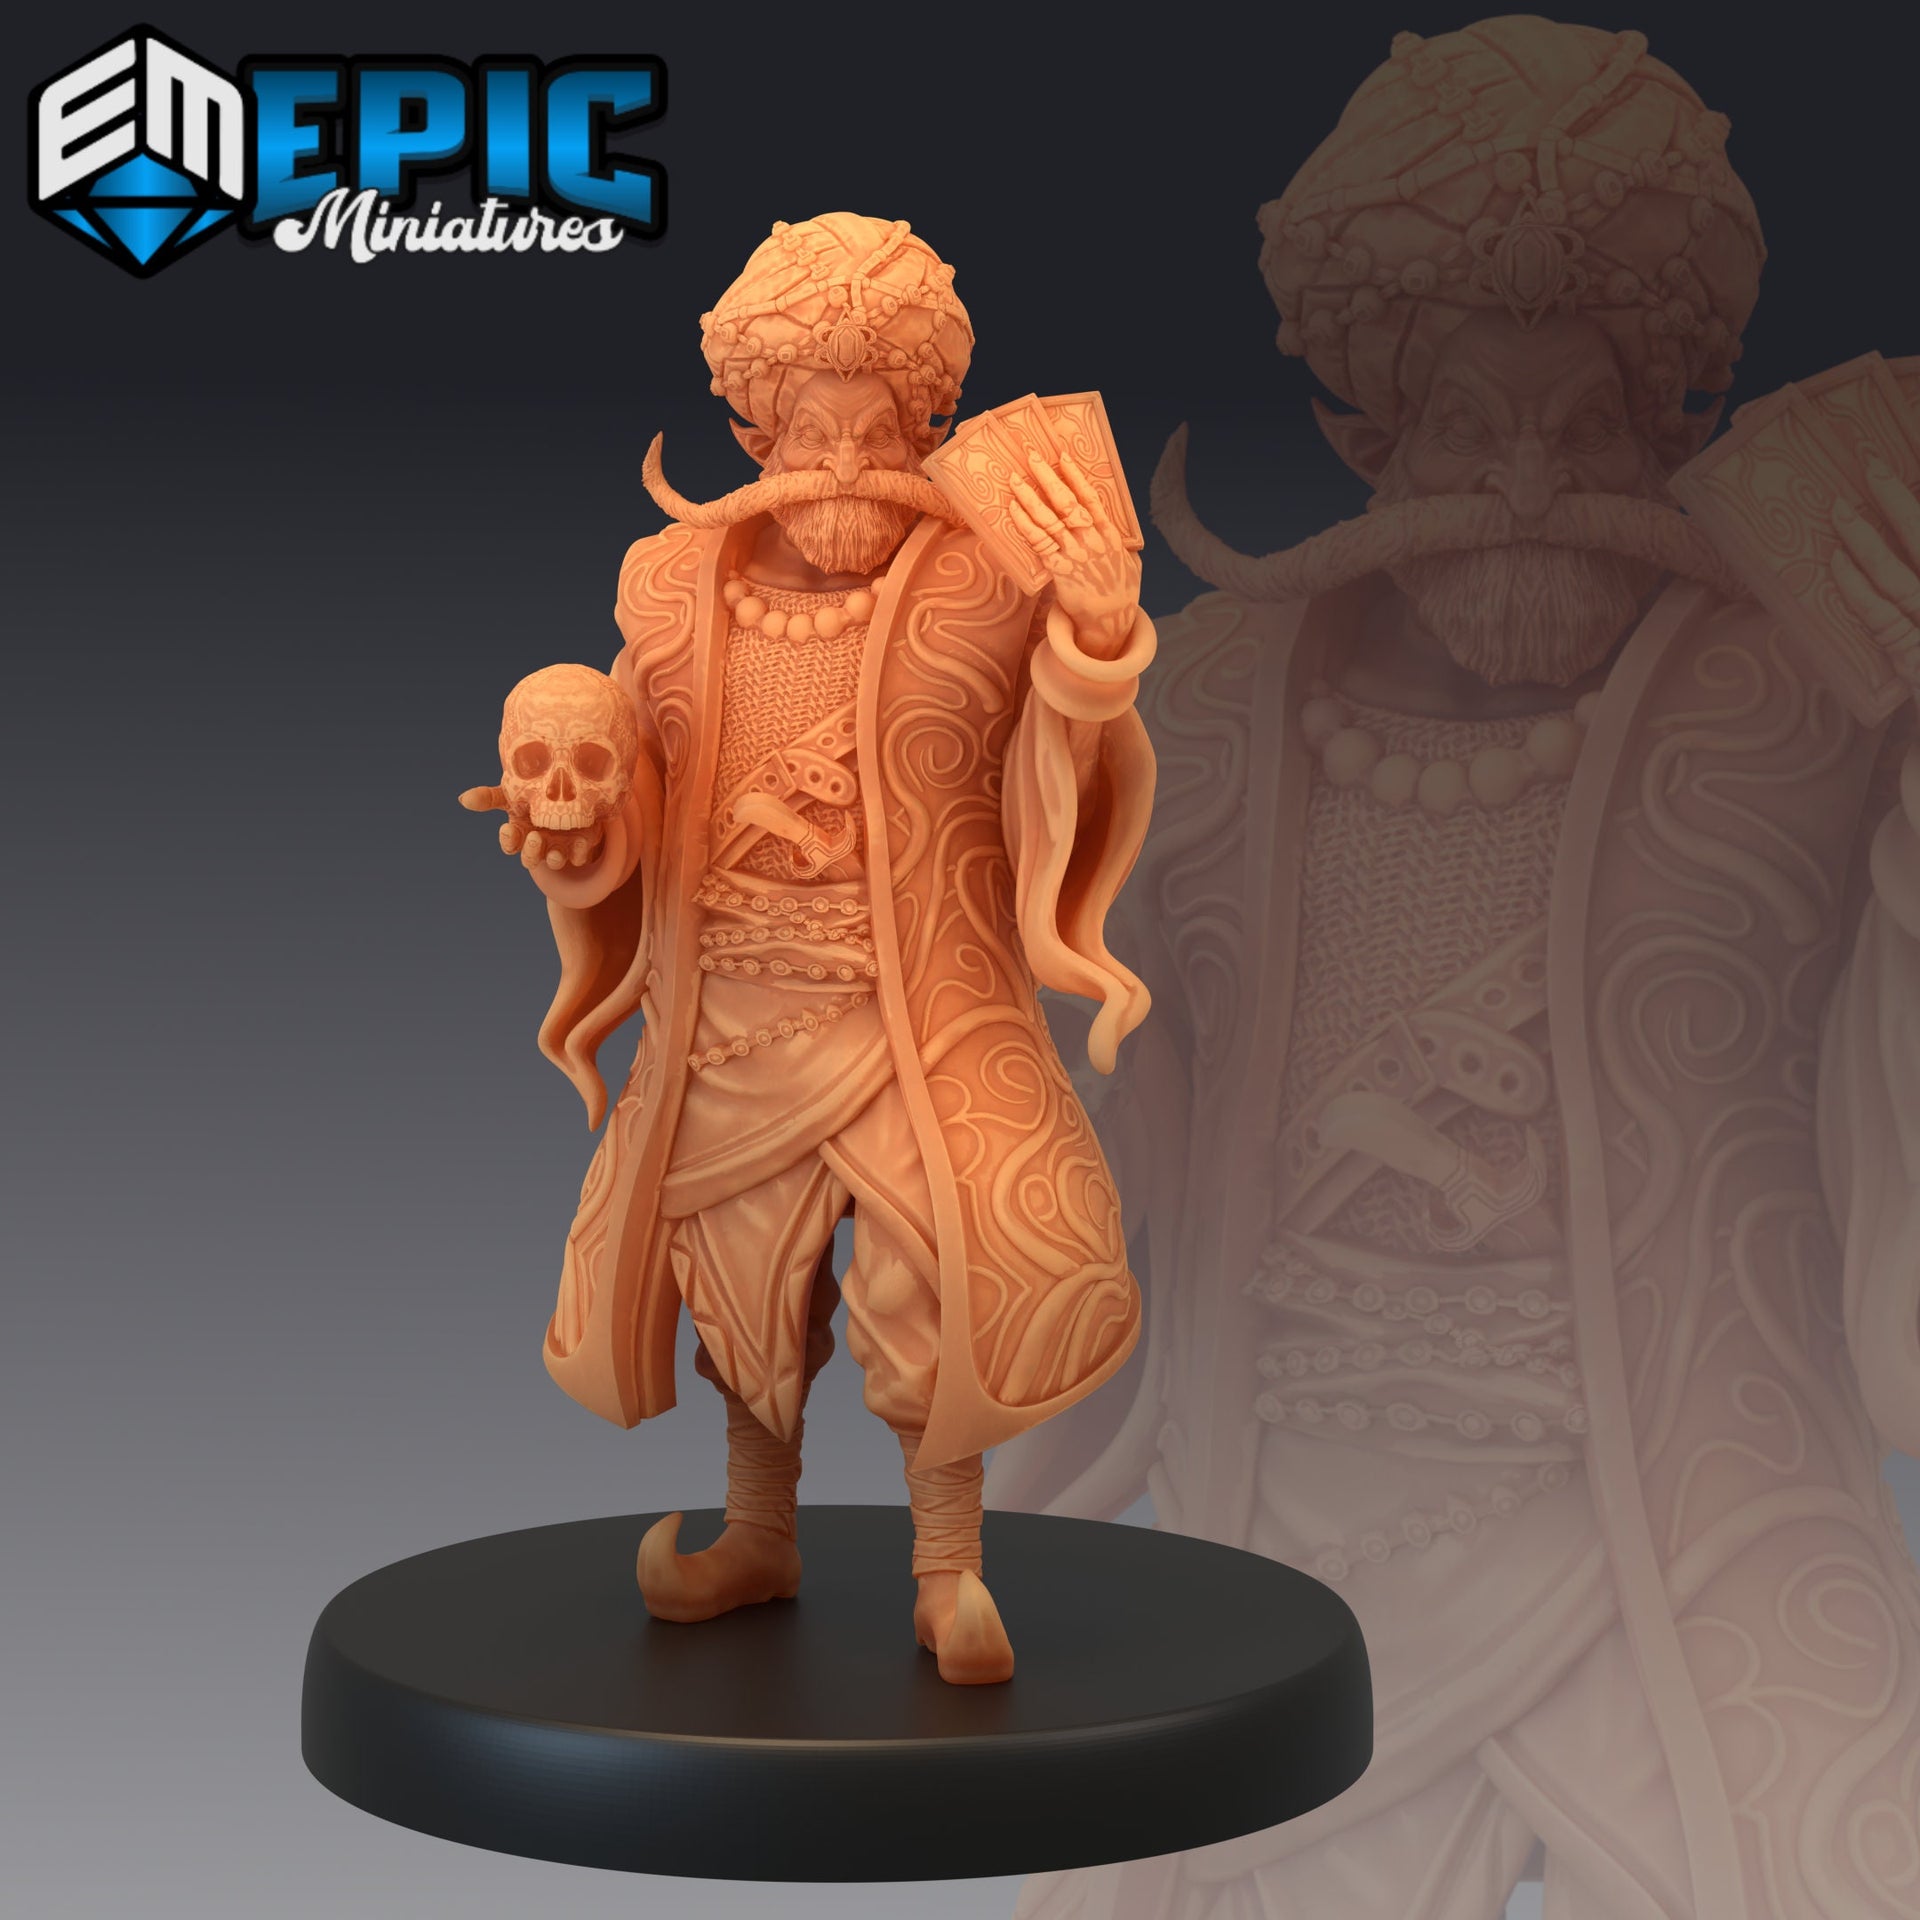 Shady Fortune Teller - Epic Miniatures 